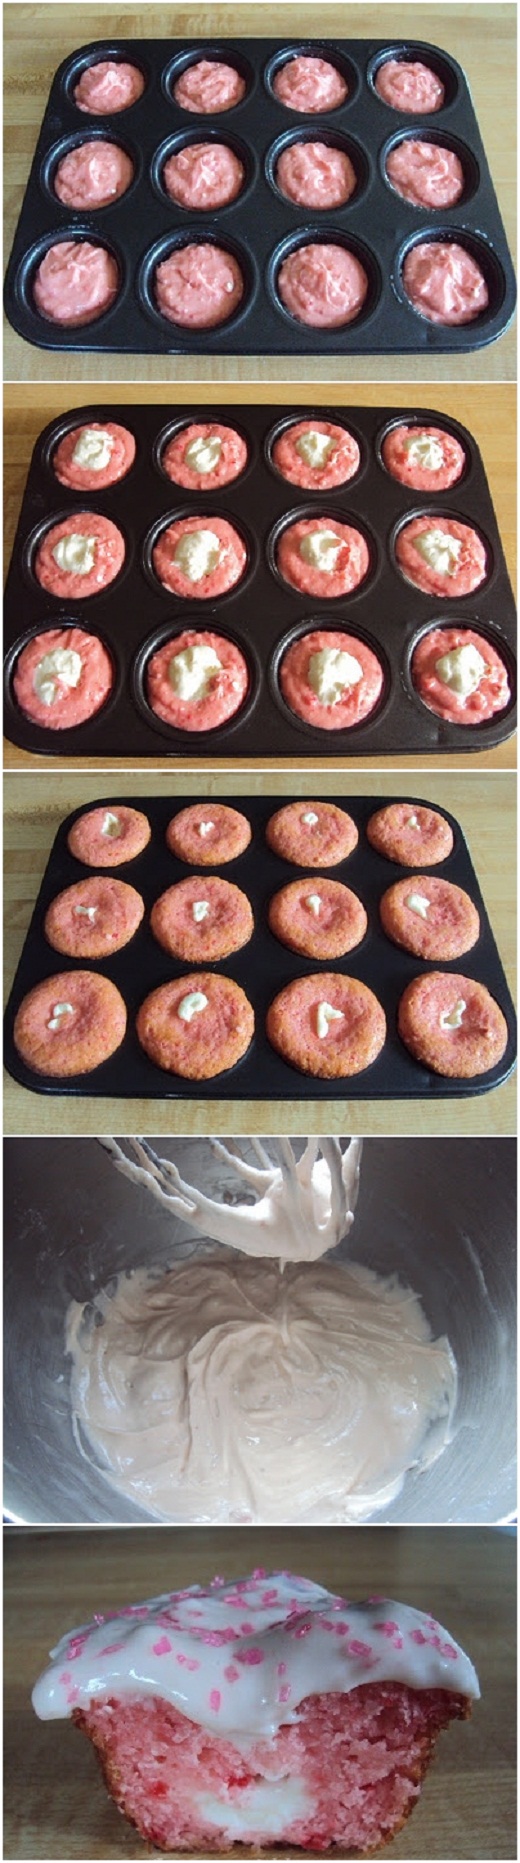 Strawberry-Cupcakes-with-Cheesecake-Filling-Recipe